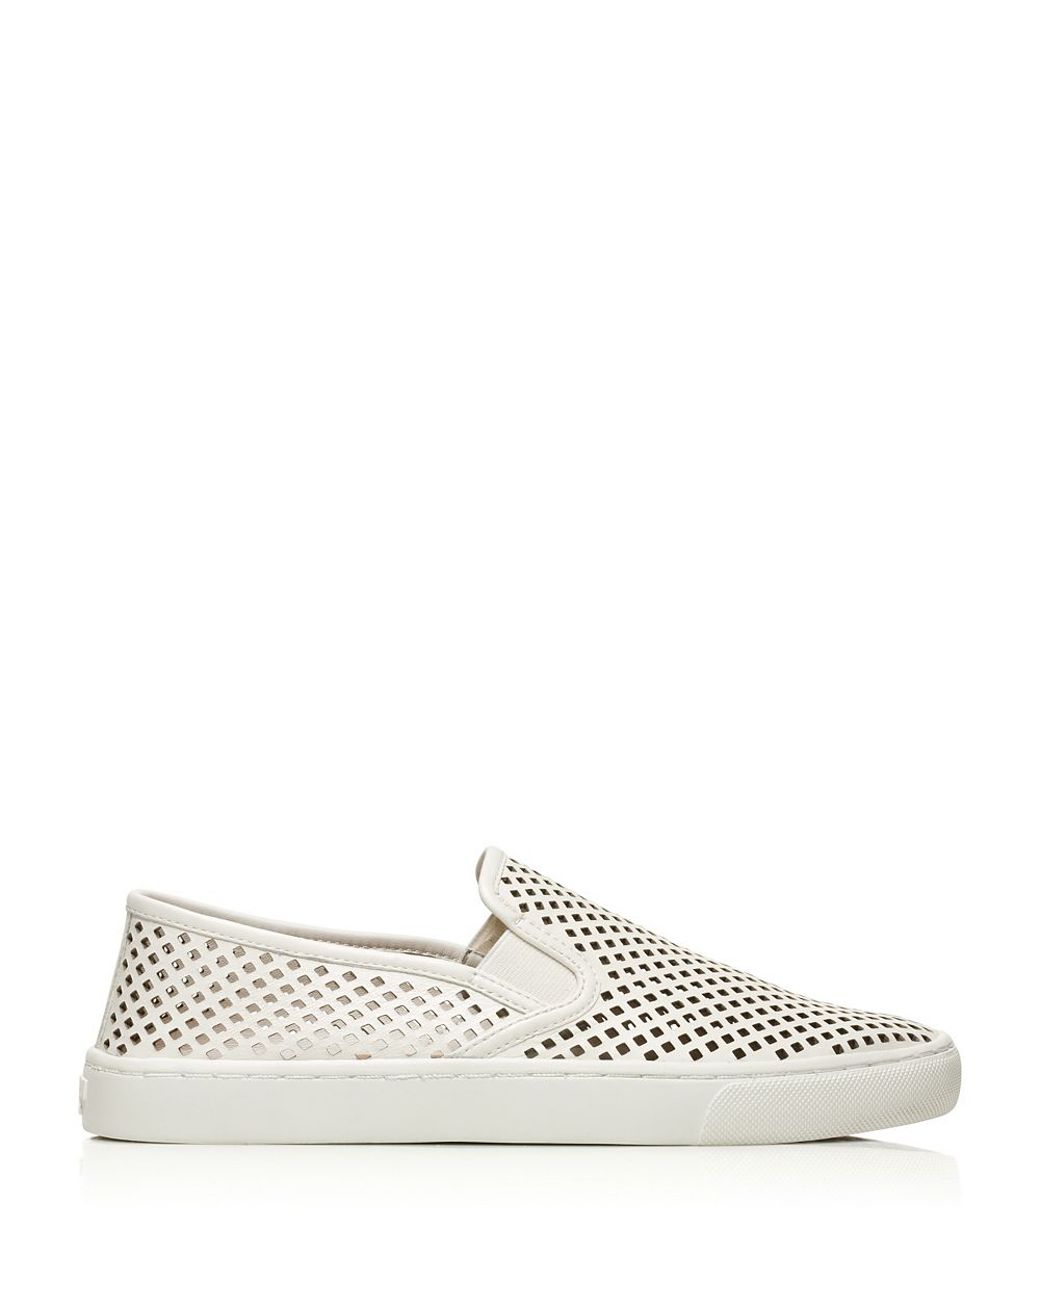 Tory Burch Jesse Perforated Sneaker in White | Lyst